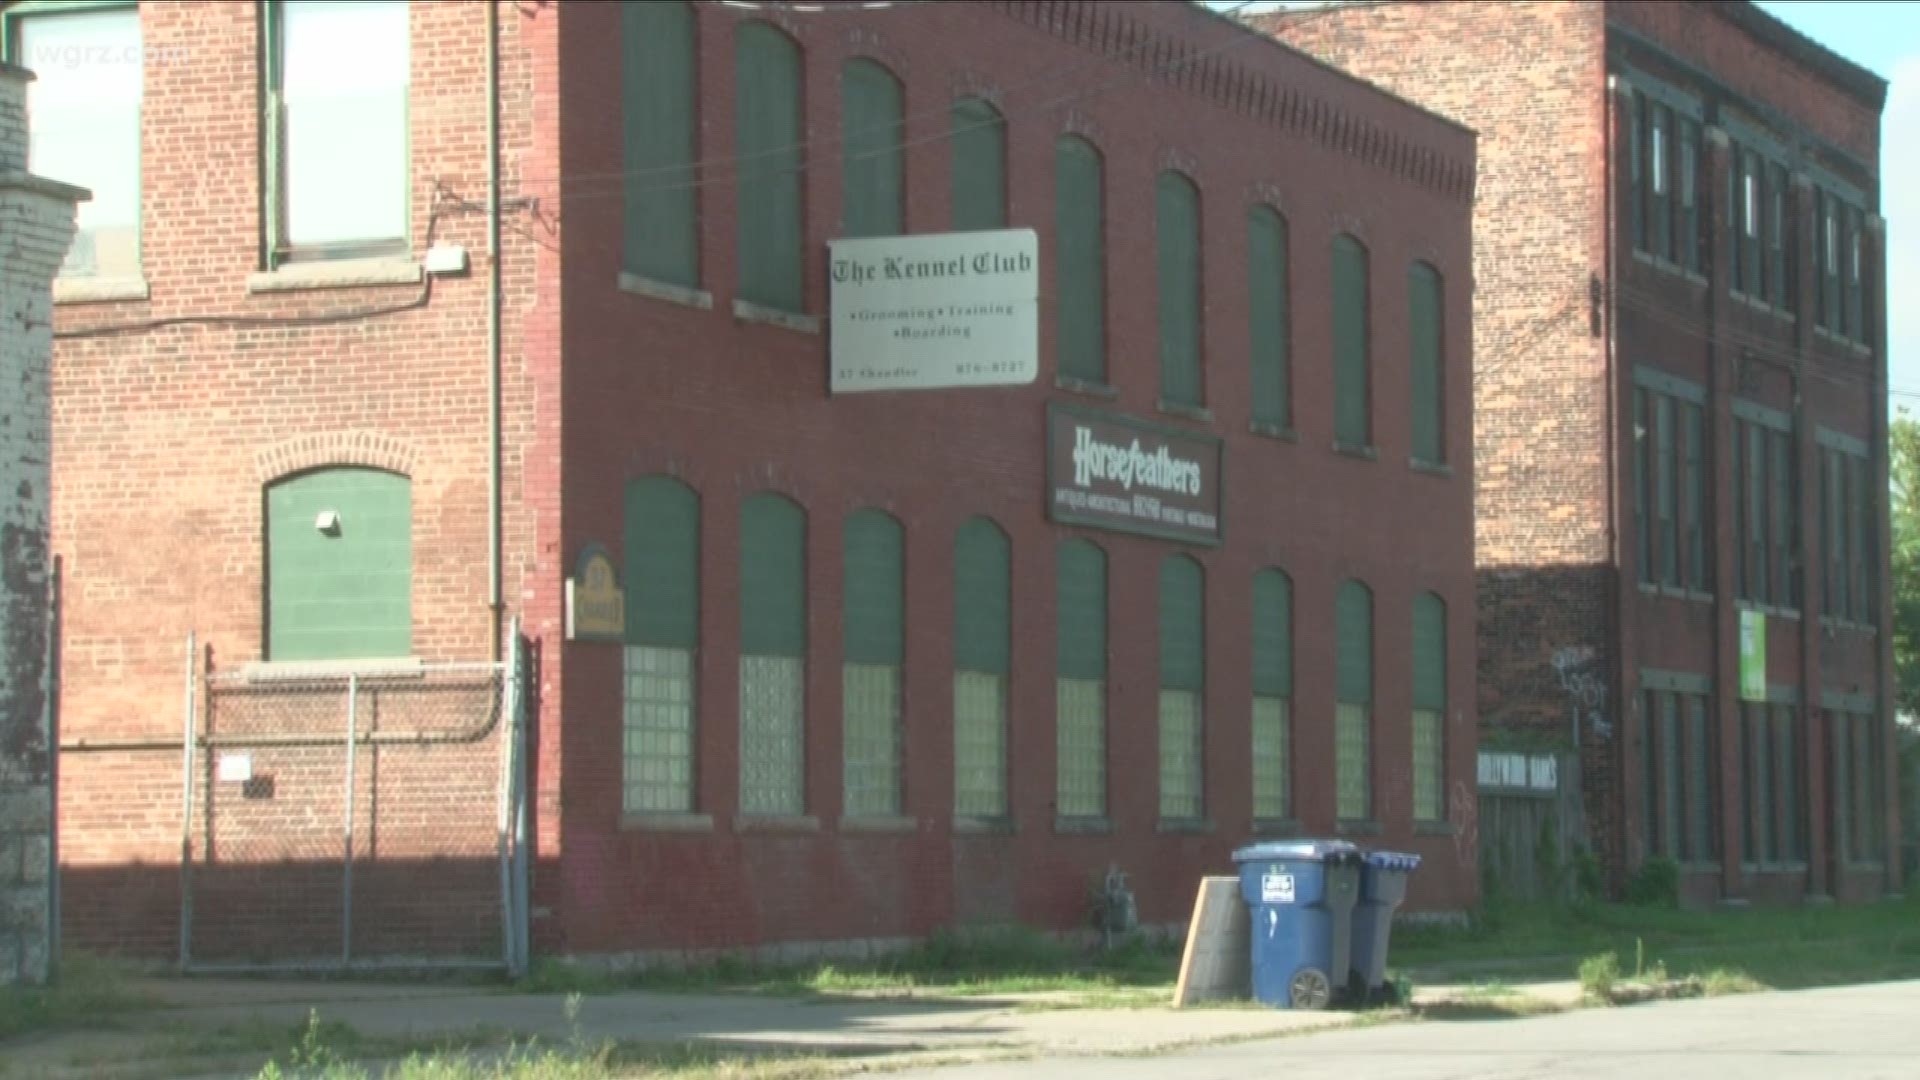 Daybreak's Heather Ly reports on a new food business incubator that is coming to Chandler Street in Buffalo's Black Rock neighborhood.